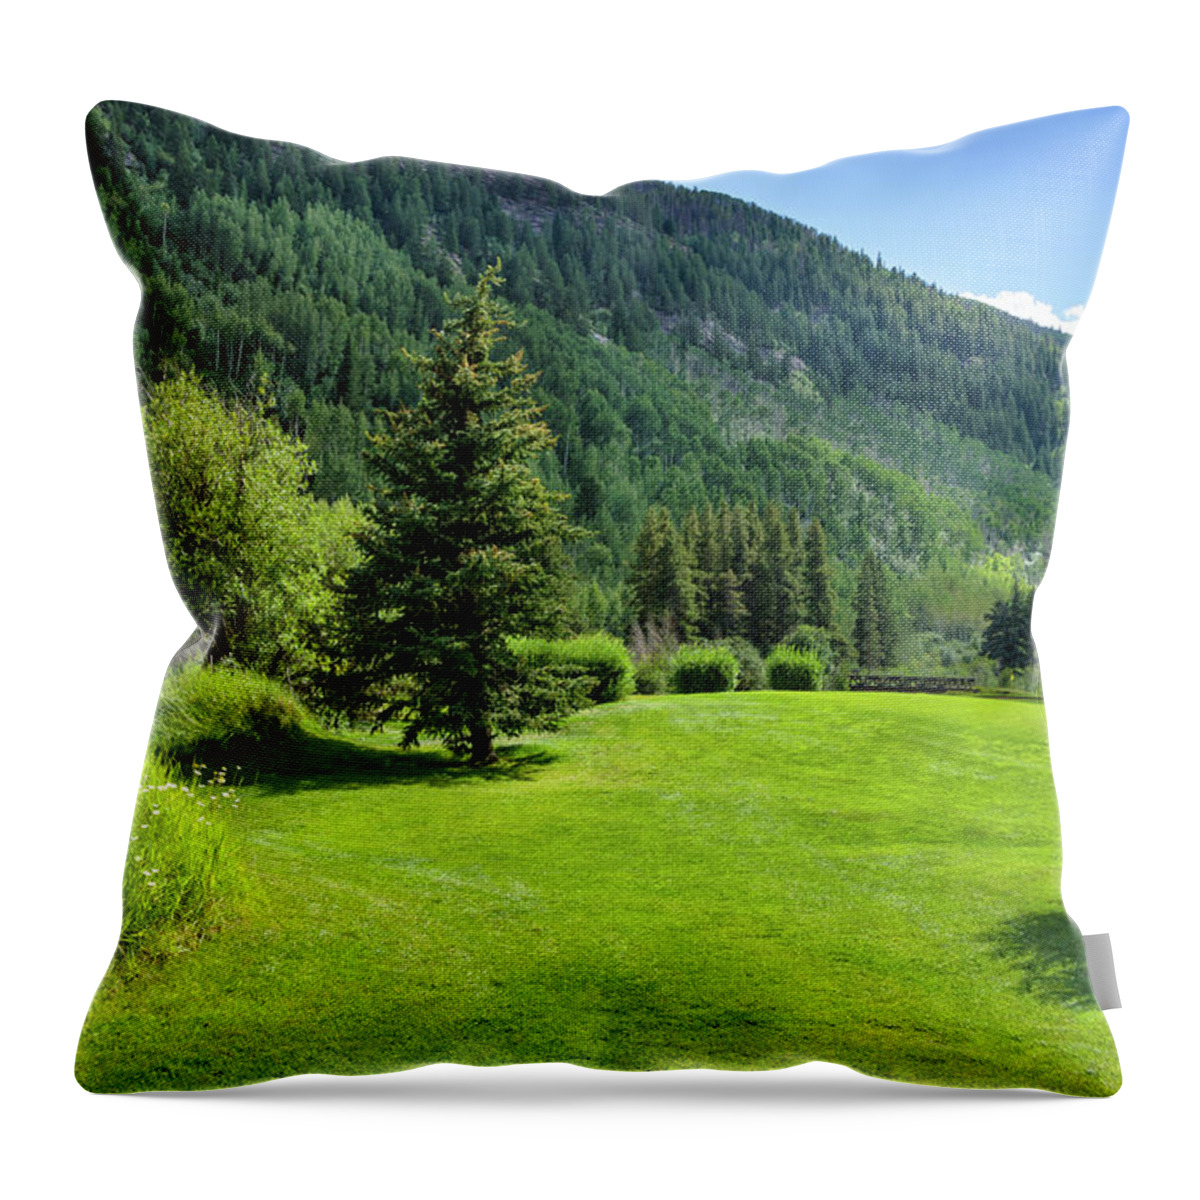 Scenics Throw Pillow featuring the photograph Lush Green Scenic Backdrop Area by Adventure photo